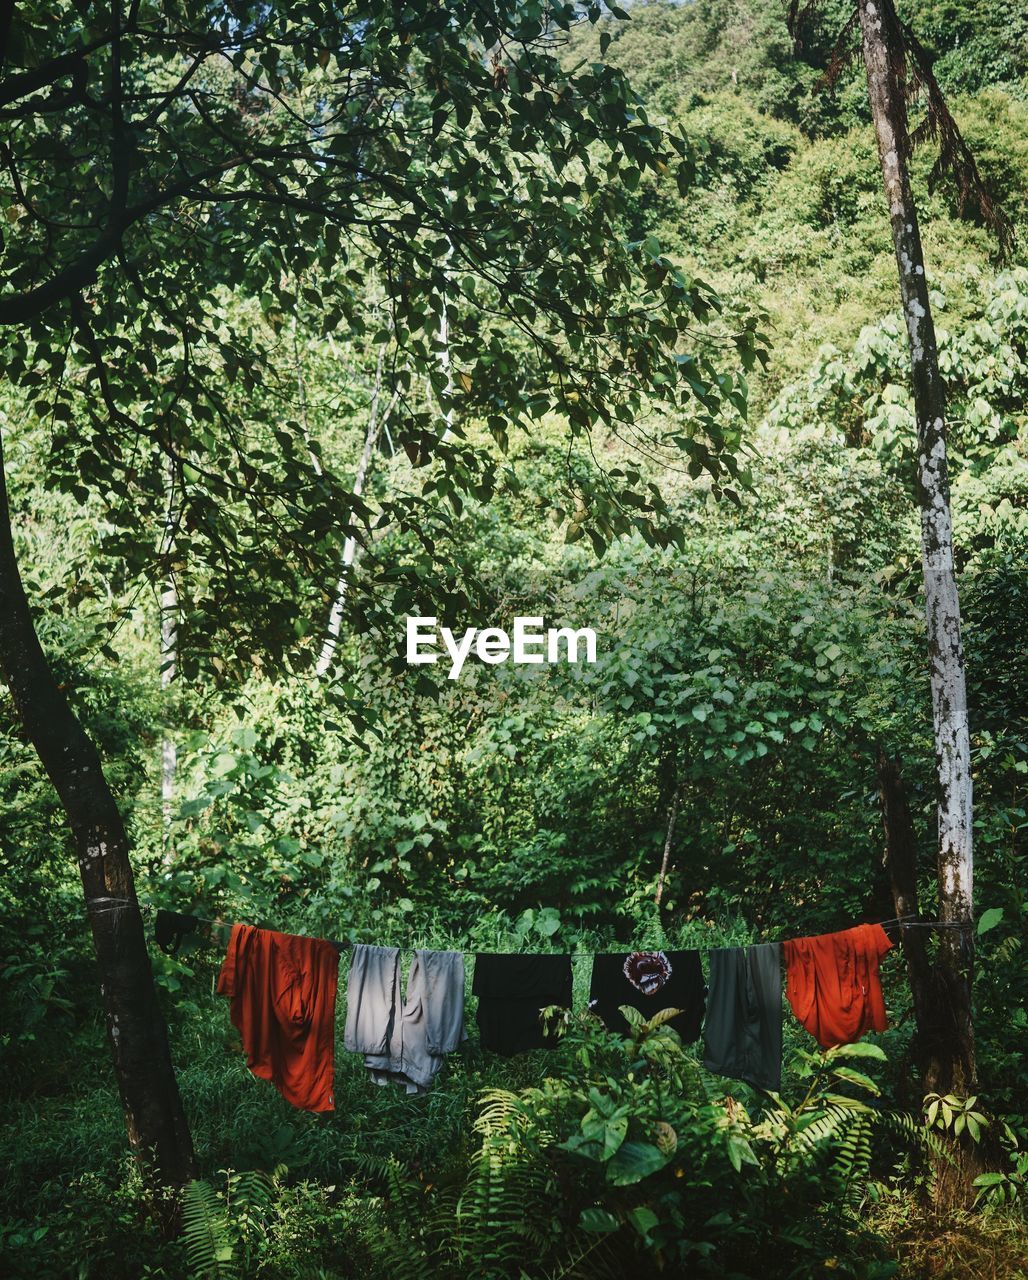 Clothes drying on clothesline amidst trees